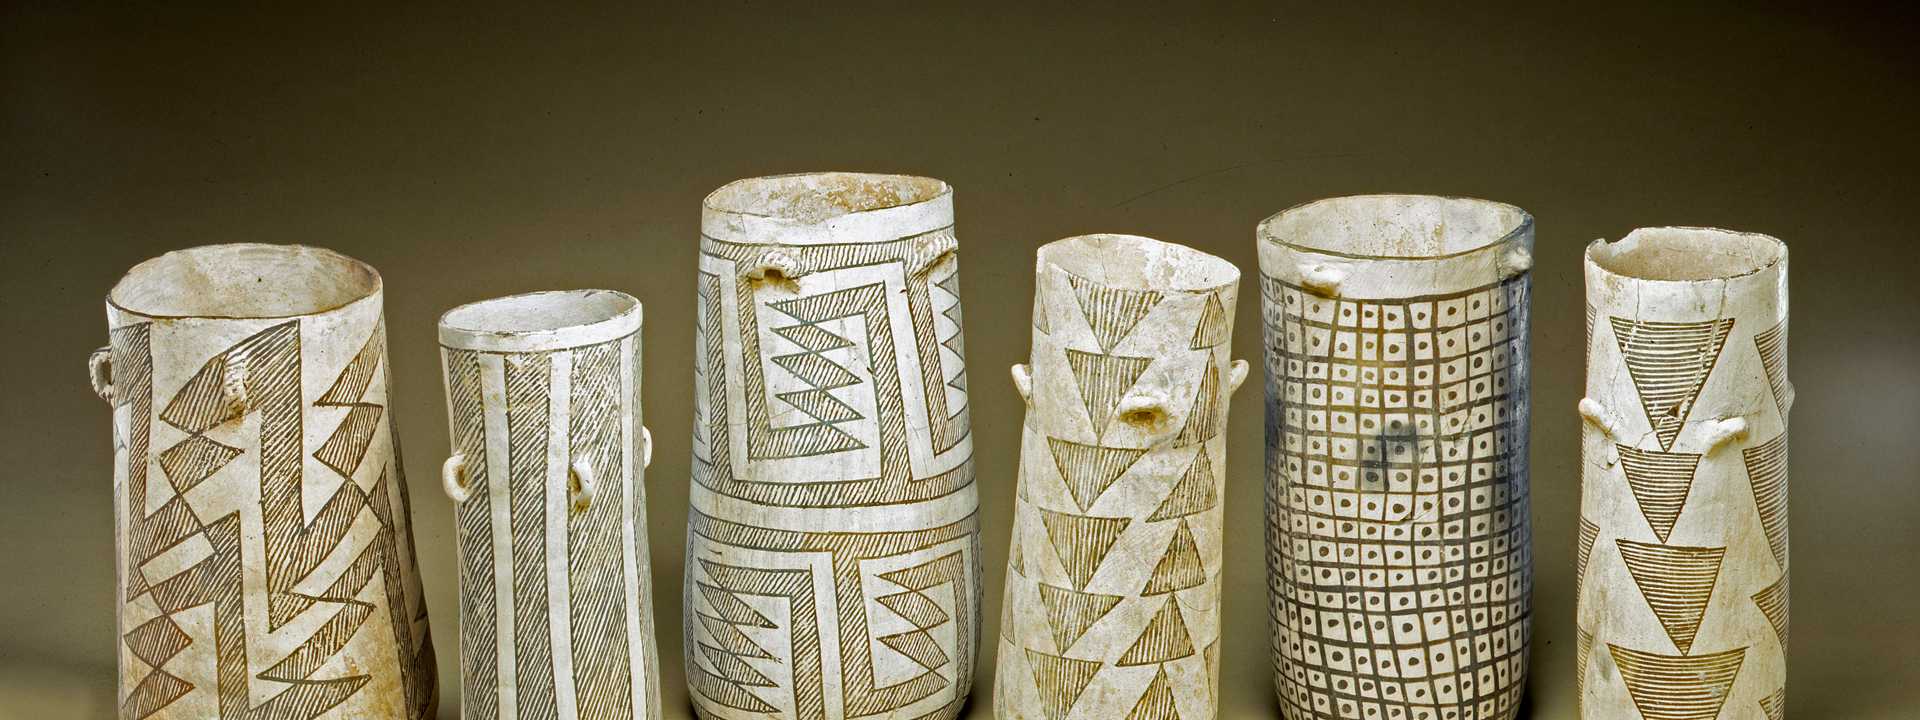 Chaco Canyon's black-and-white cylindrical vases